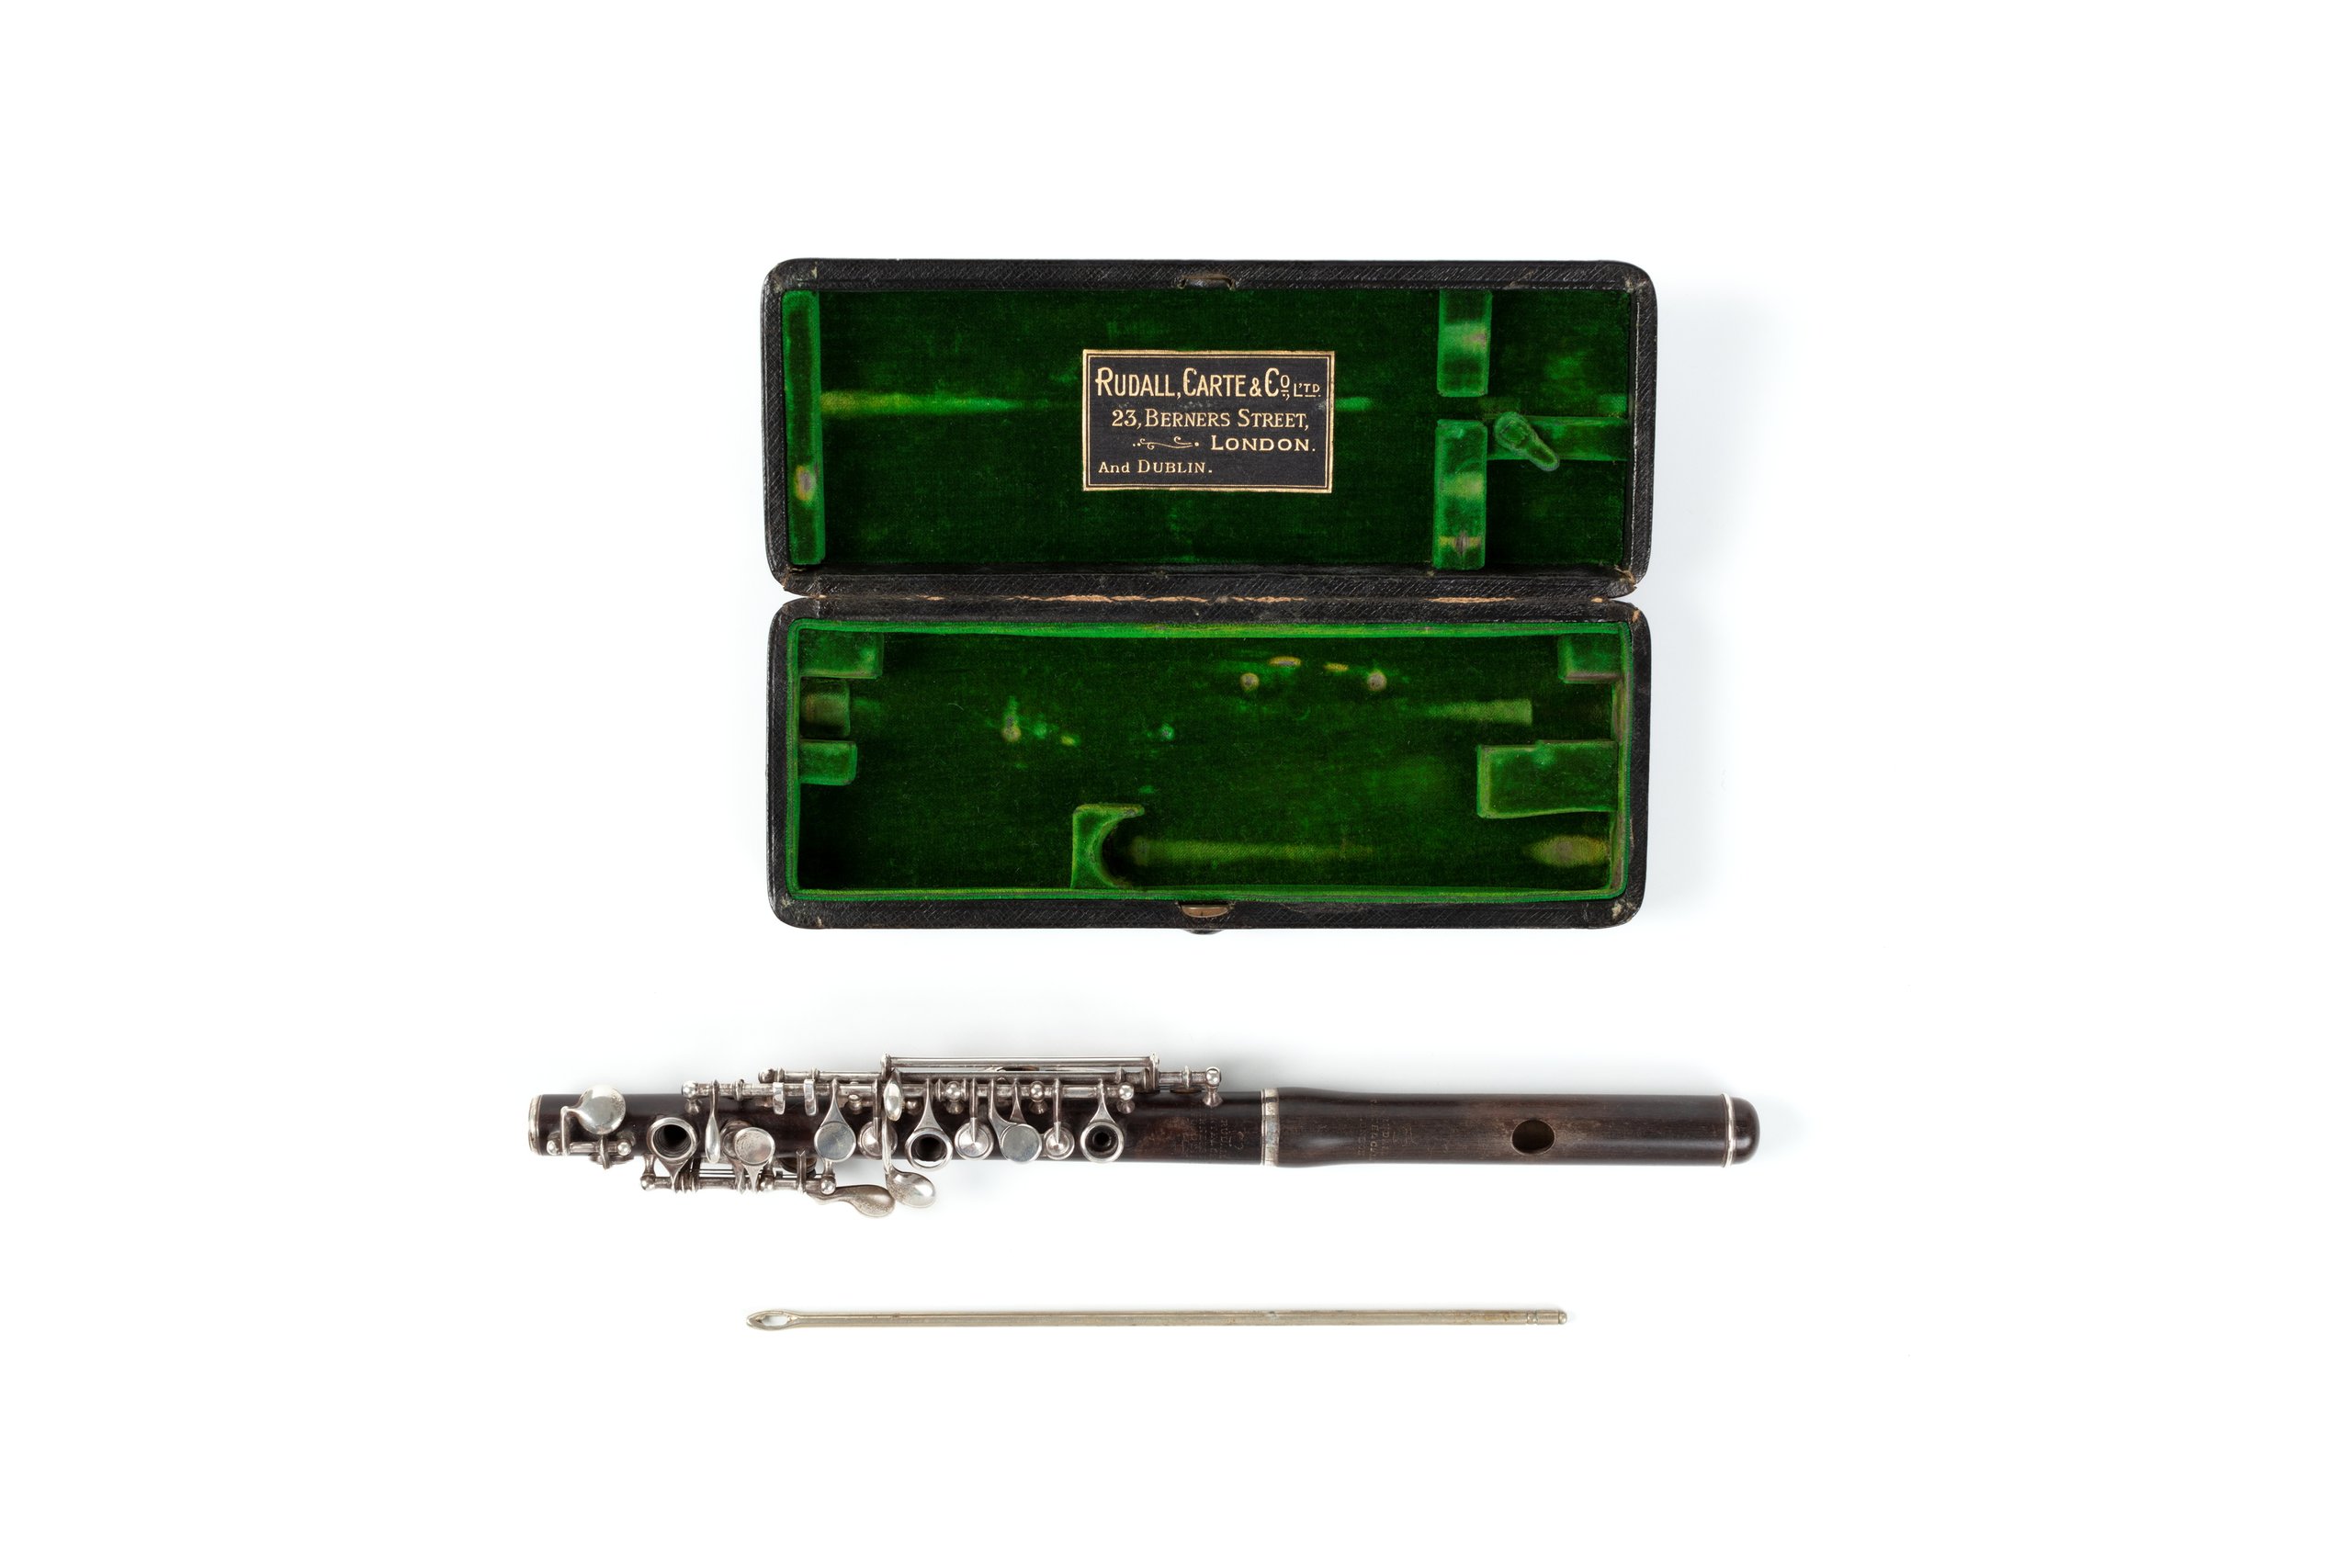 Radcliff system piccolo used by Richard Chugg